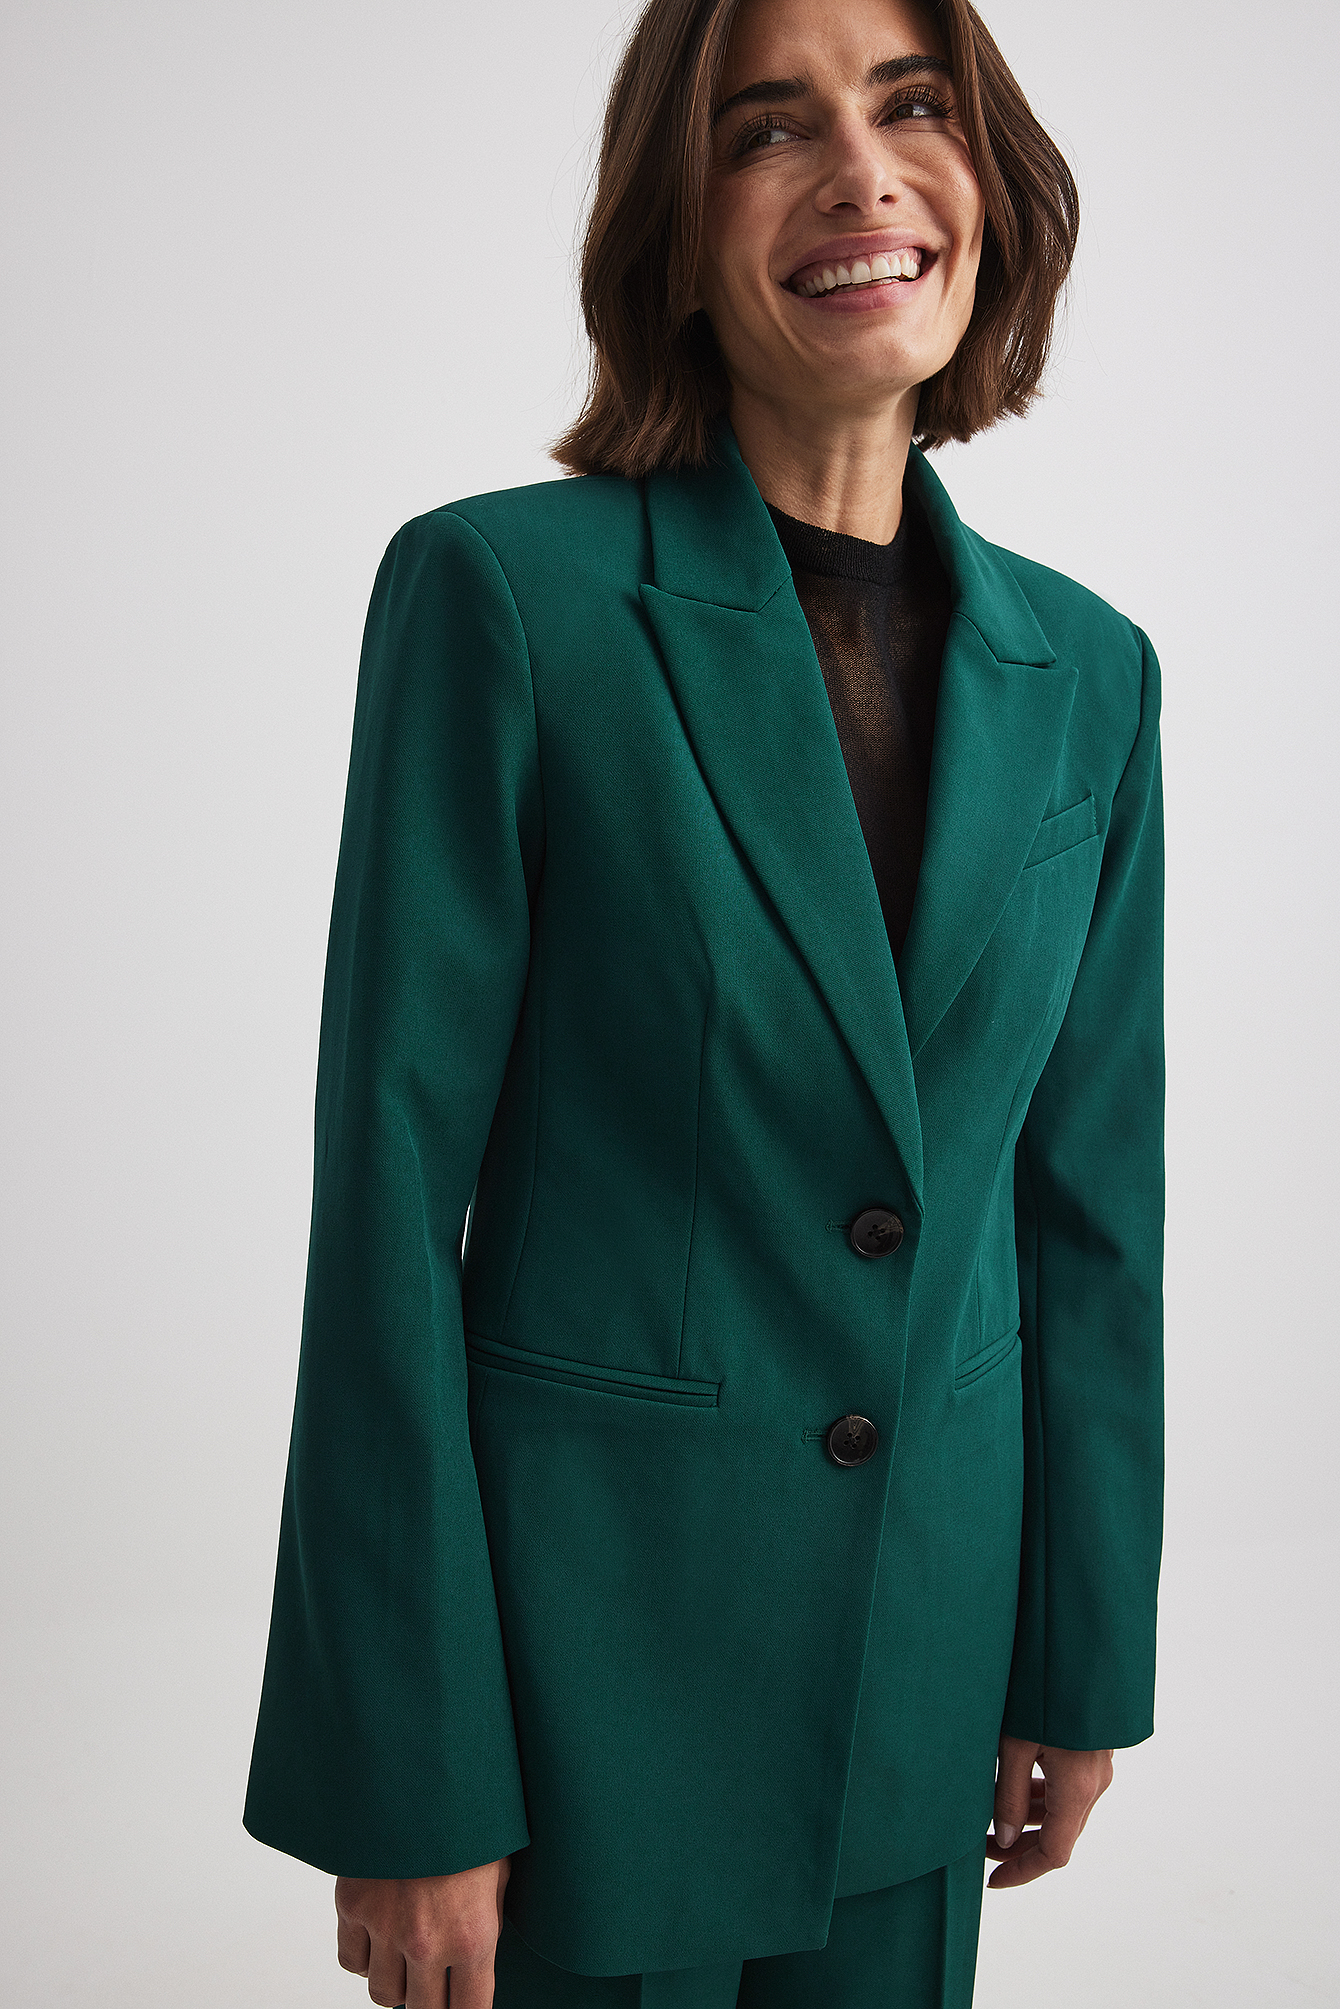 Womens Green Suits